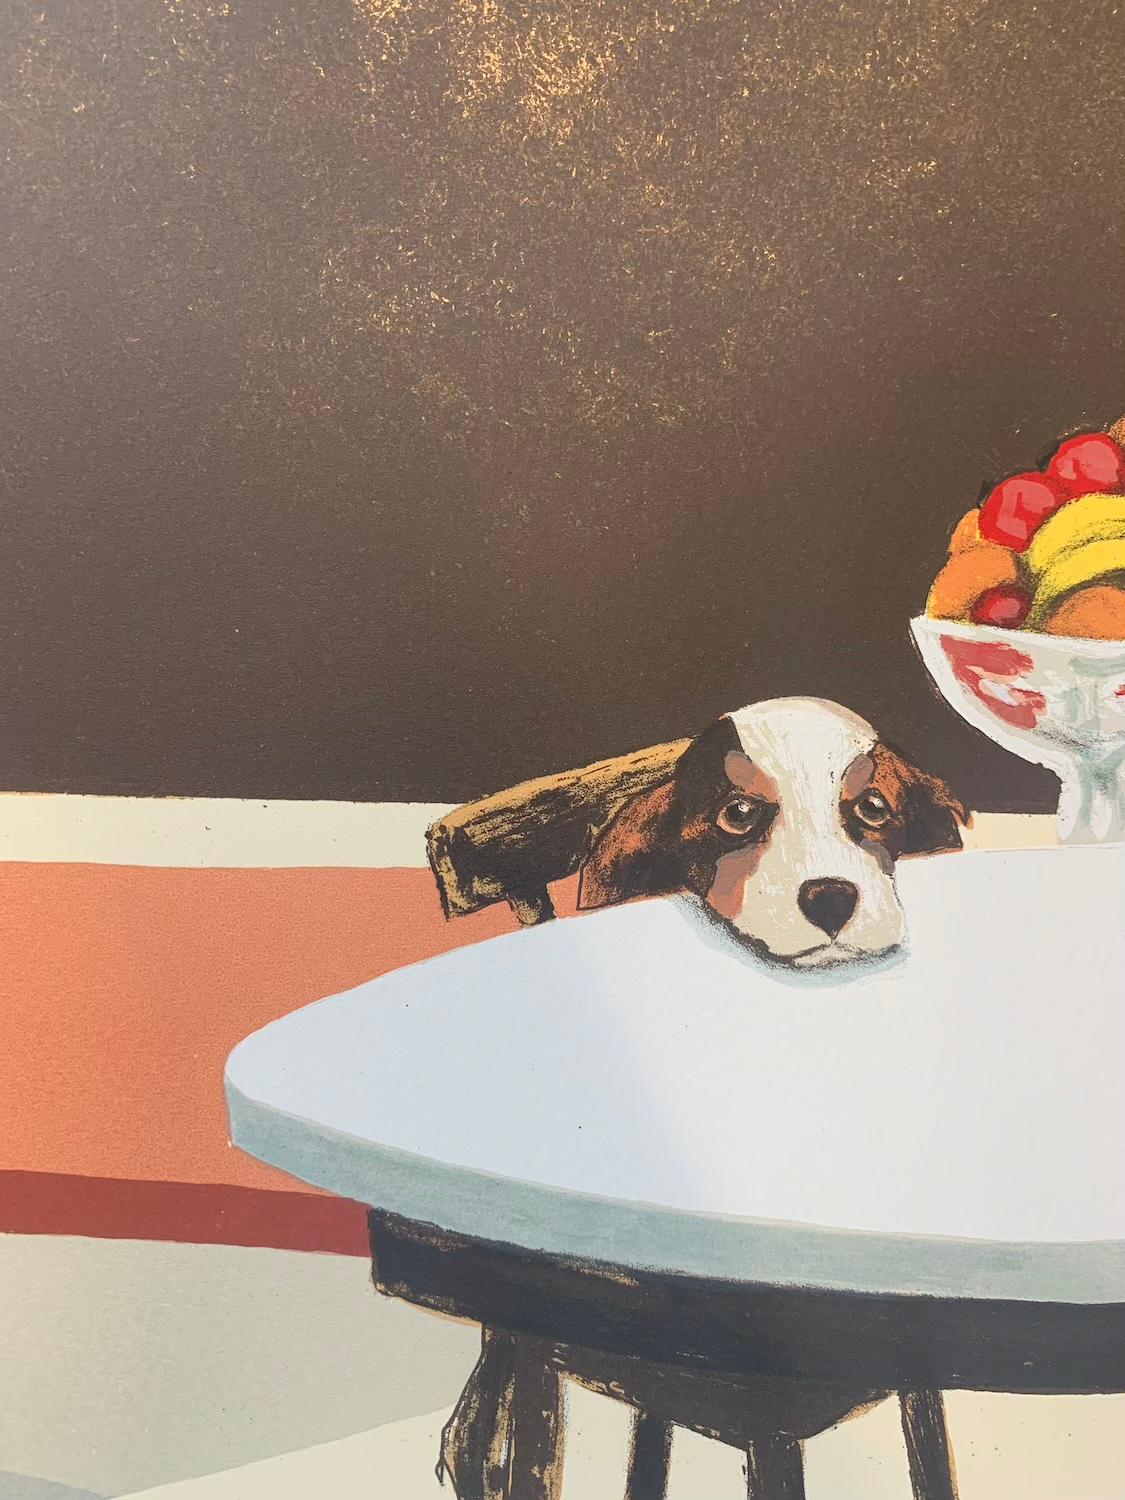 Limited edition print of a woman having a coffee in a cafe while her dog sits with her.
Buy Mychael Barratt printmaker works with Wychwood Art gallery online. Mychael Barratt was born in Toronto, Canada, however, considers himself to be a Londoner